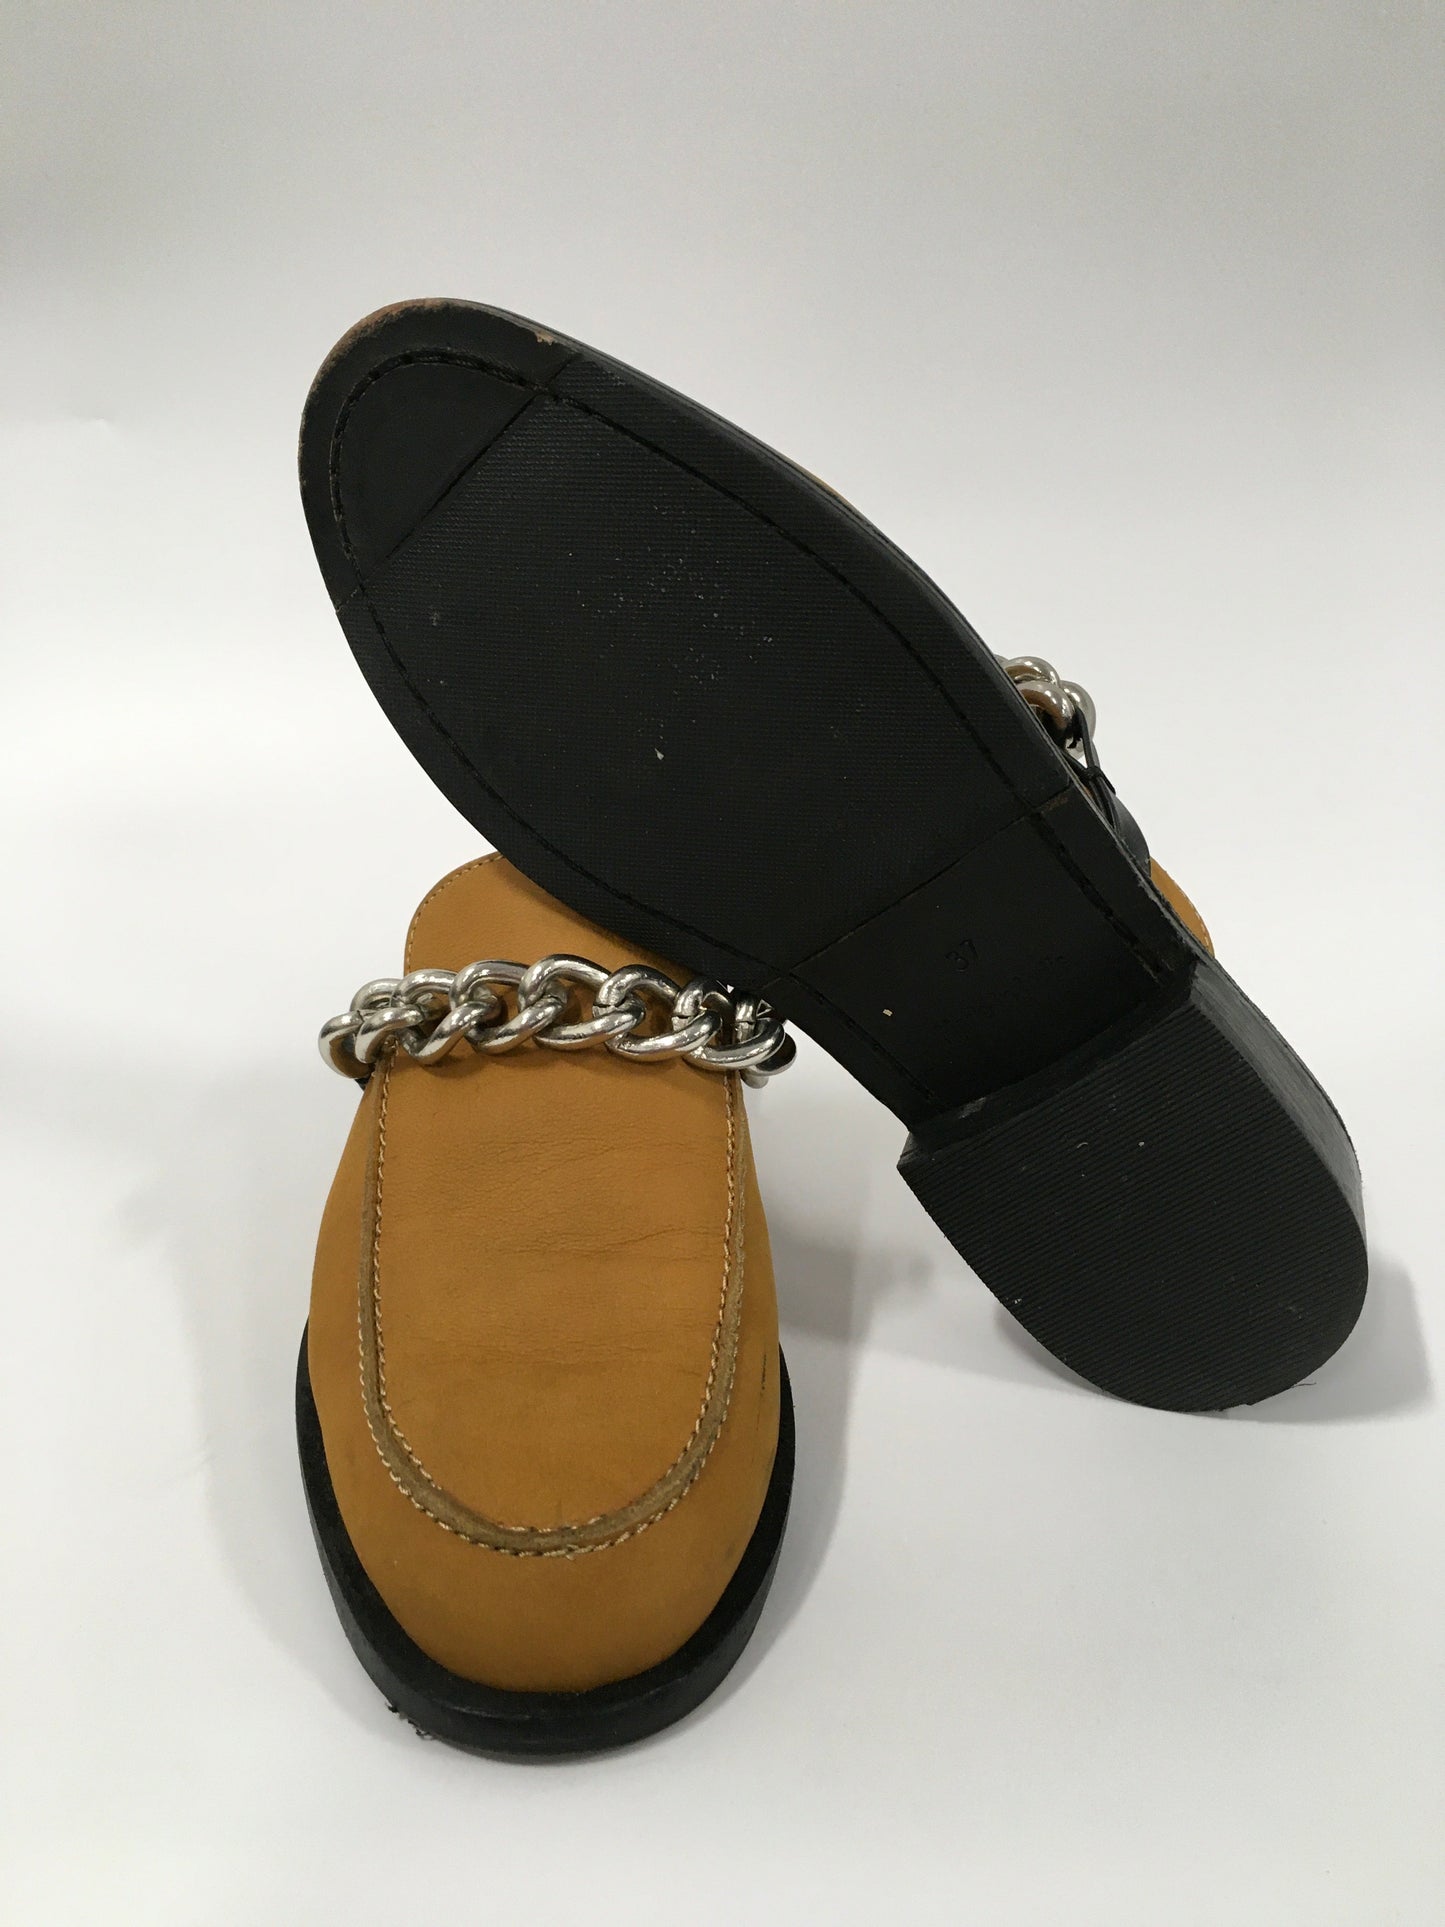 Tan Shoes Flats Free People, Size 6.5